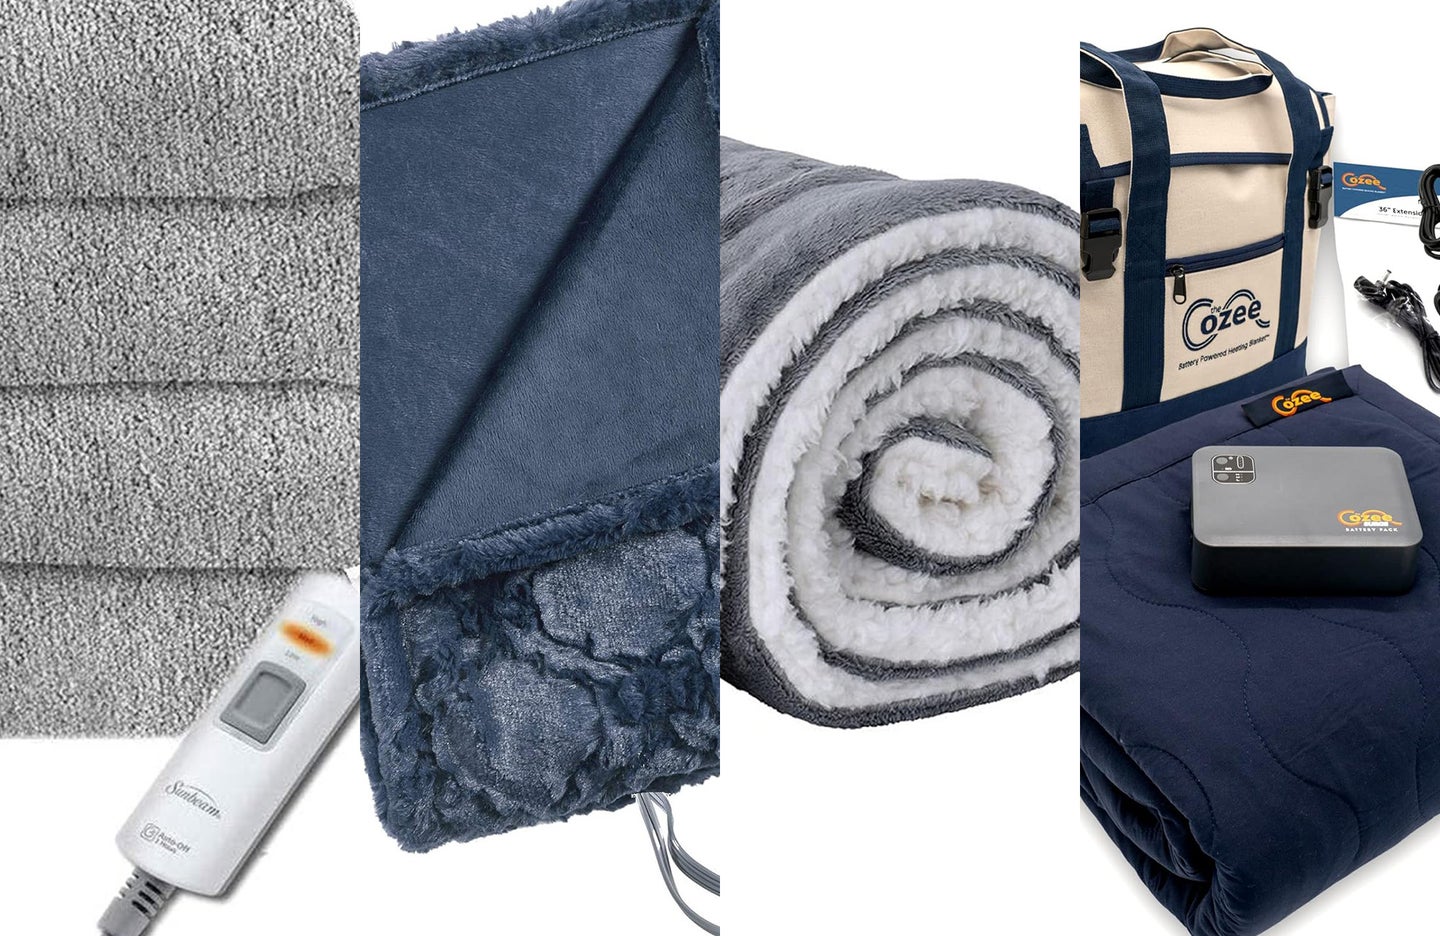 Grey and blue heated blankets separated into fourths horizontally on a white background.